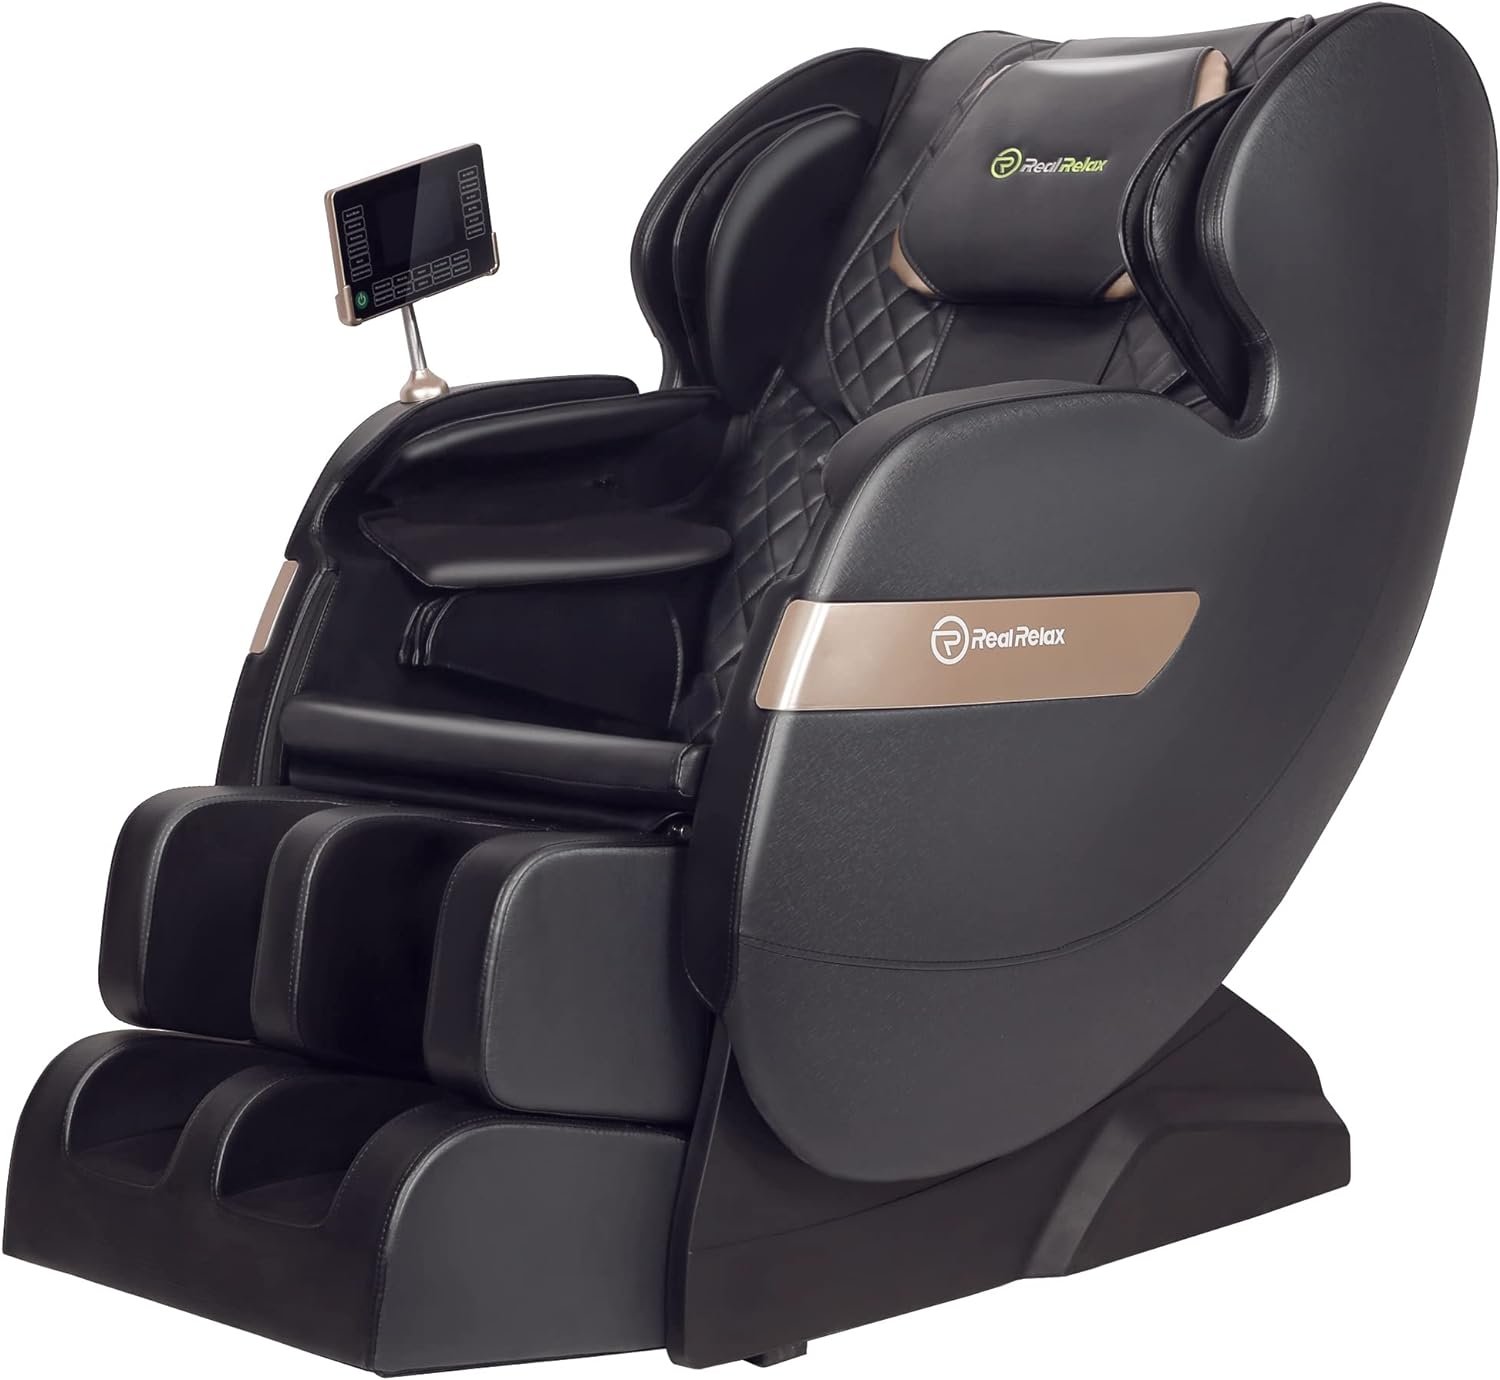 Real Relax 2022 Massage Chair Review